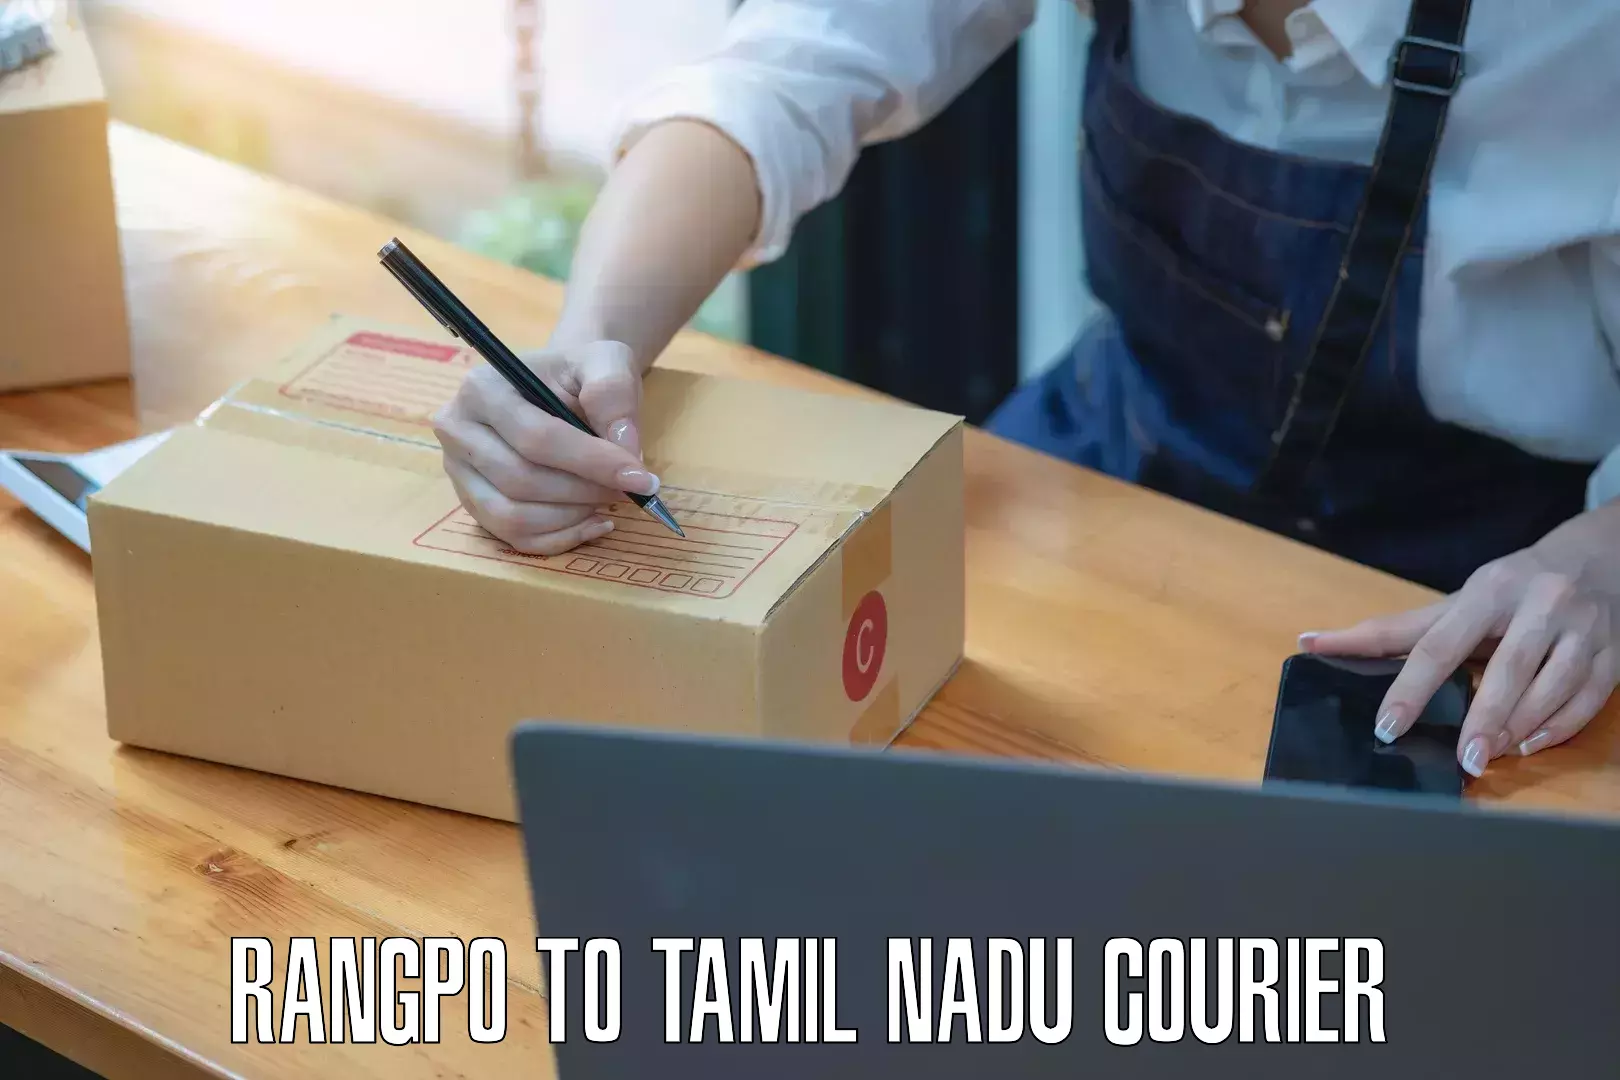 Reliable courier service Rangpo to Tamil Nadu